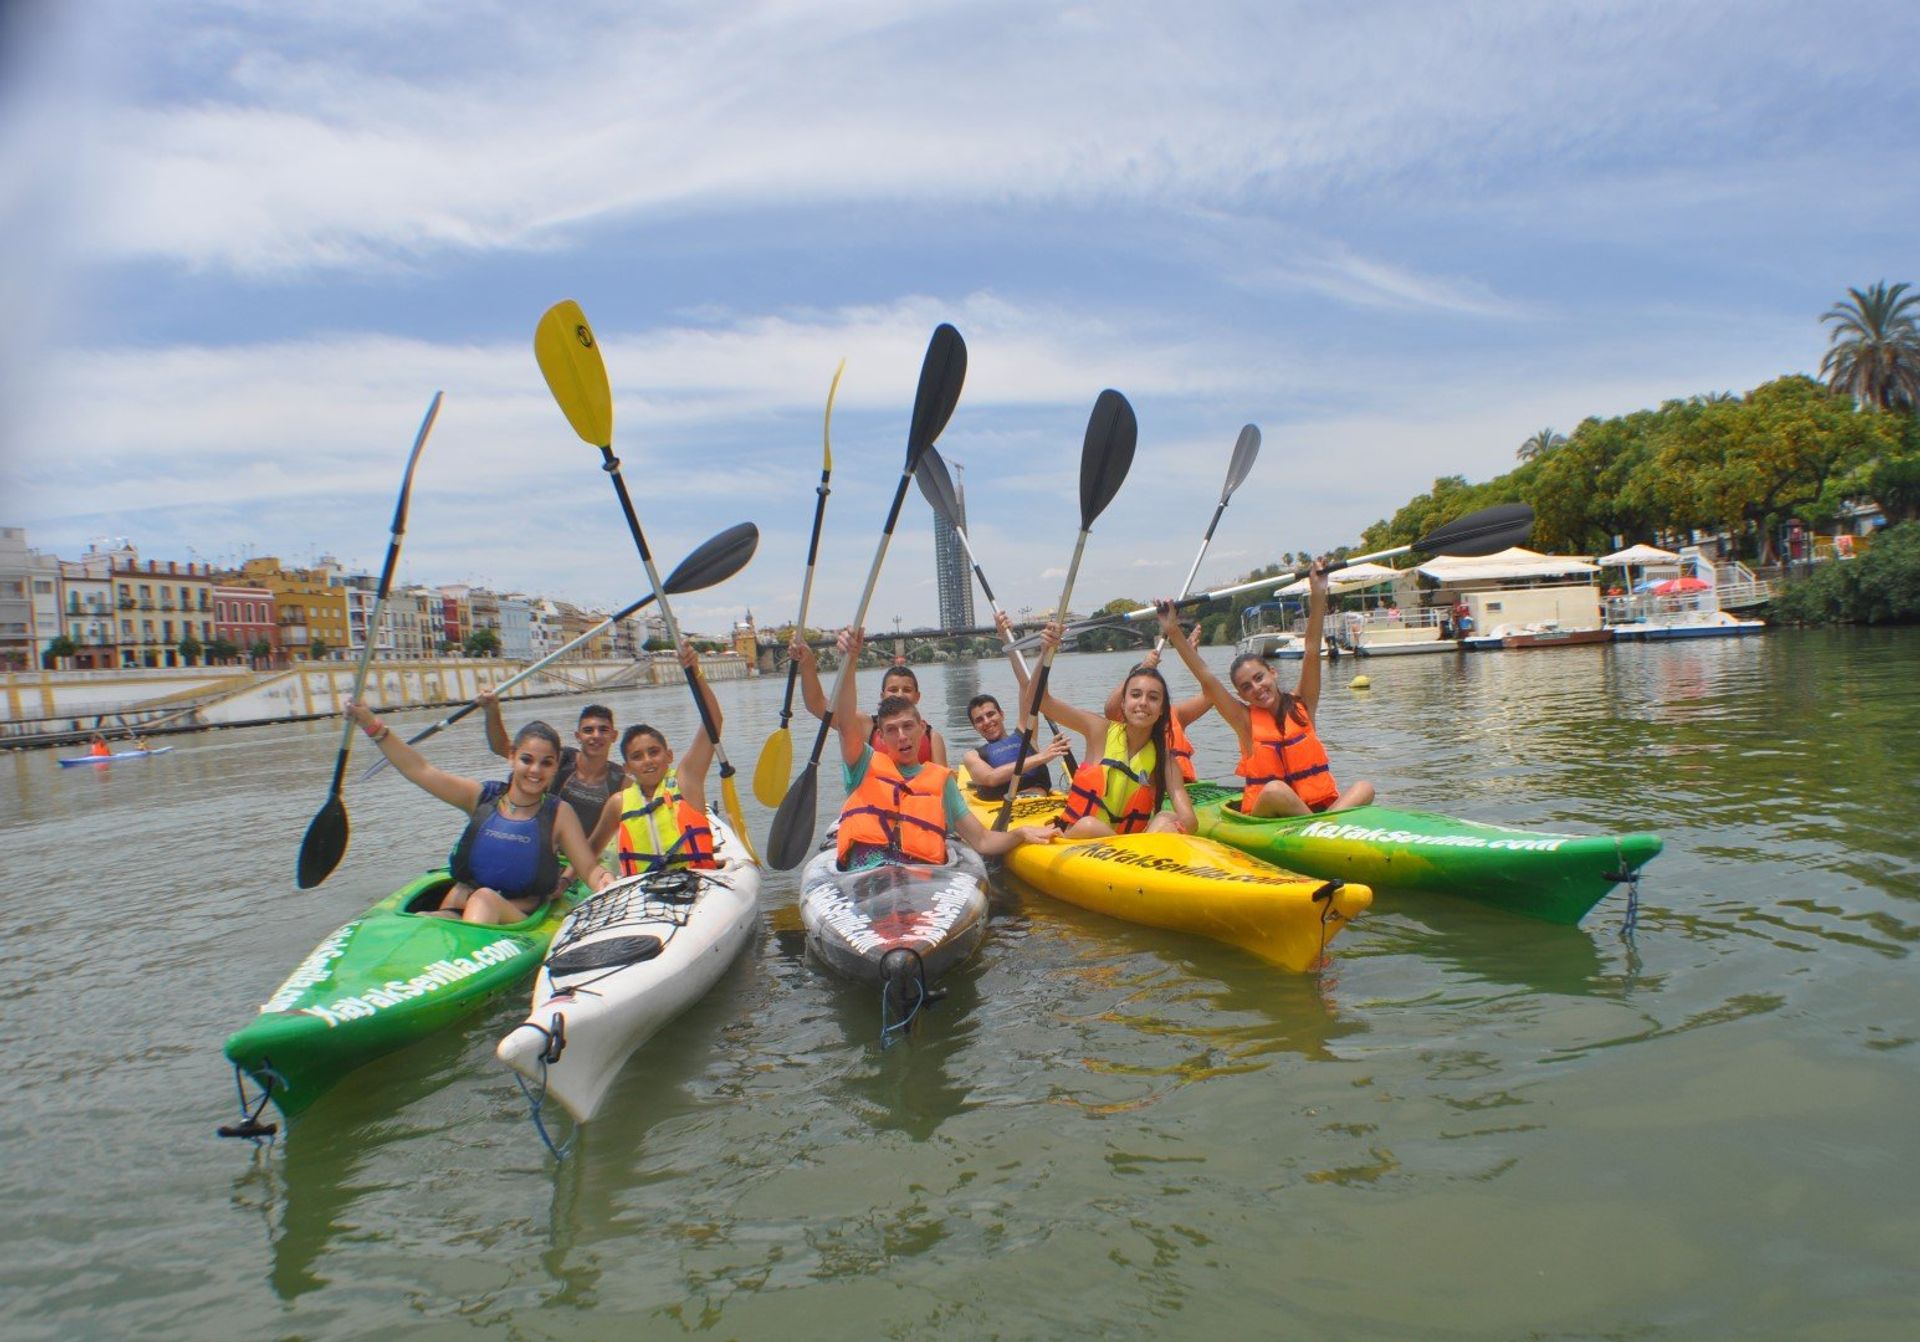 Kayaking and canoeing along the Guadalquivir River is a great way to explore the surrounding landscape and smaller towns